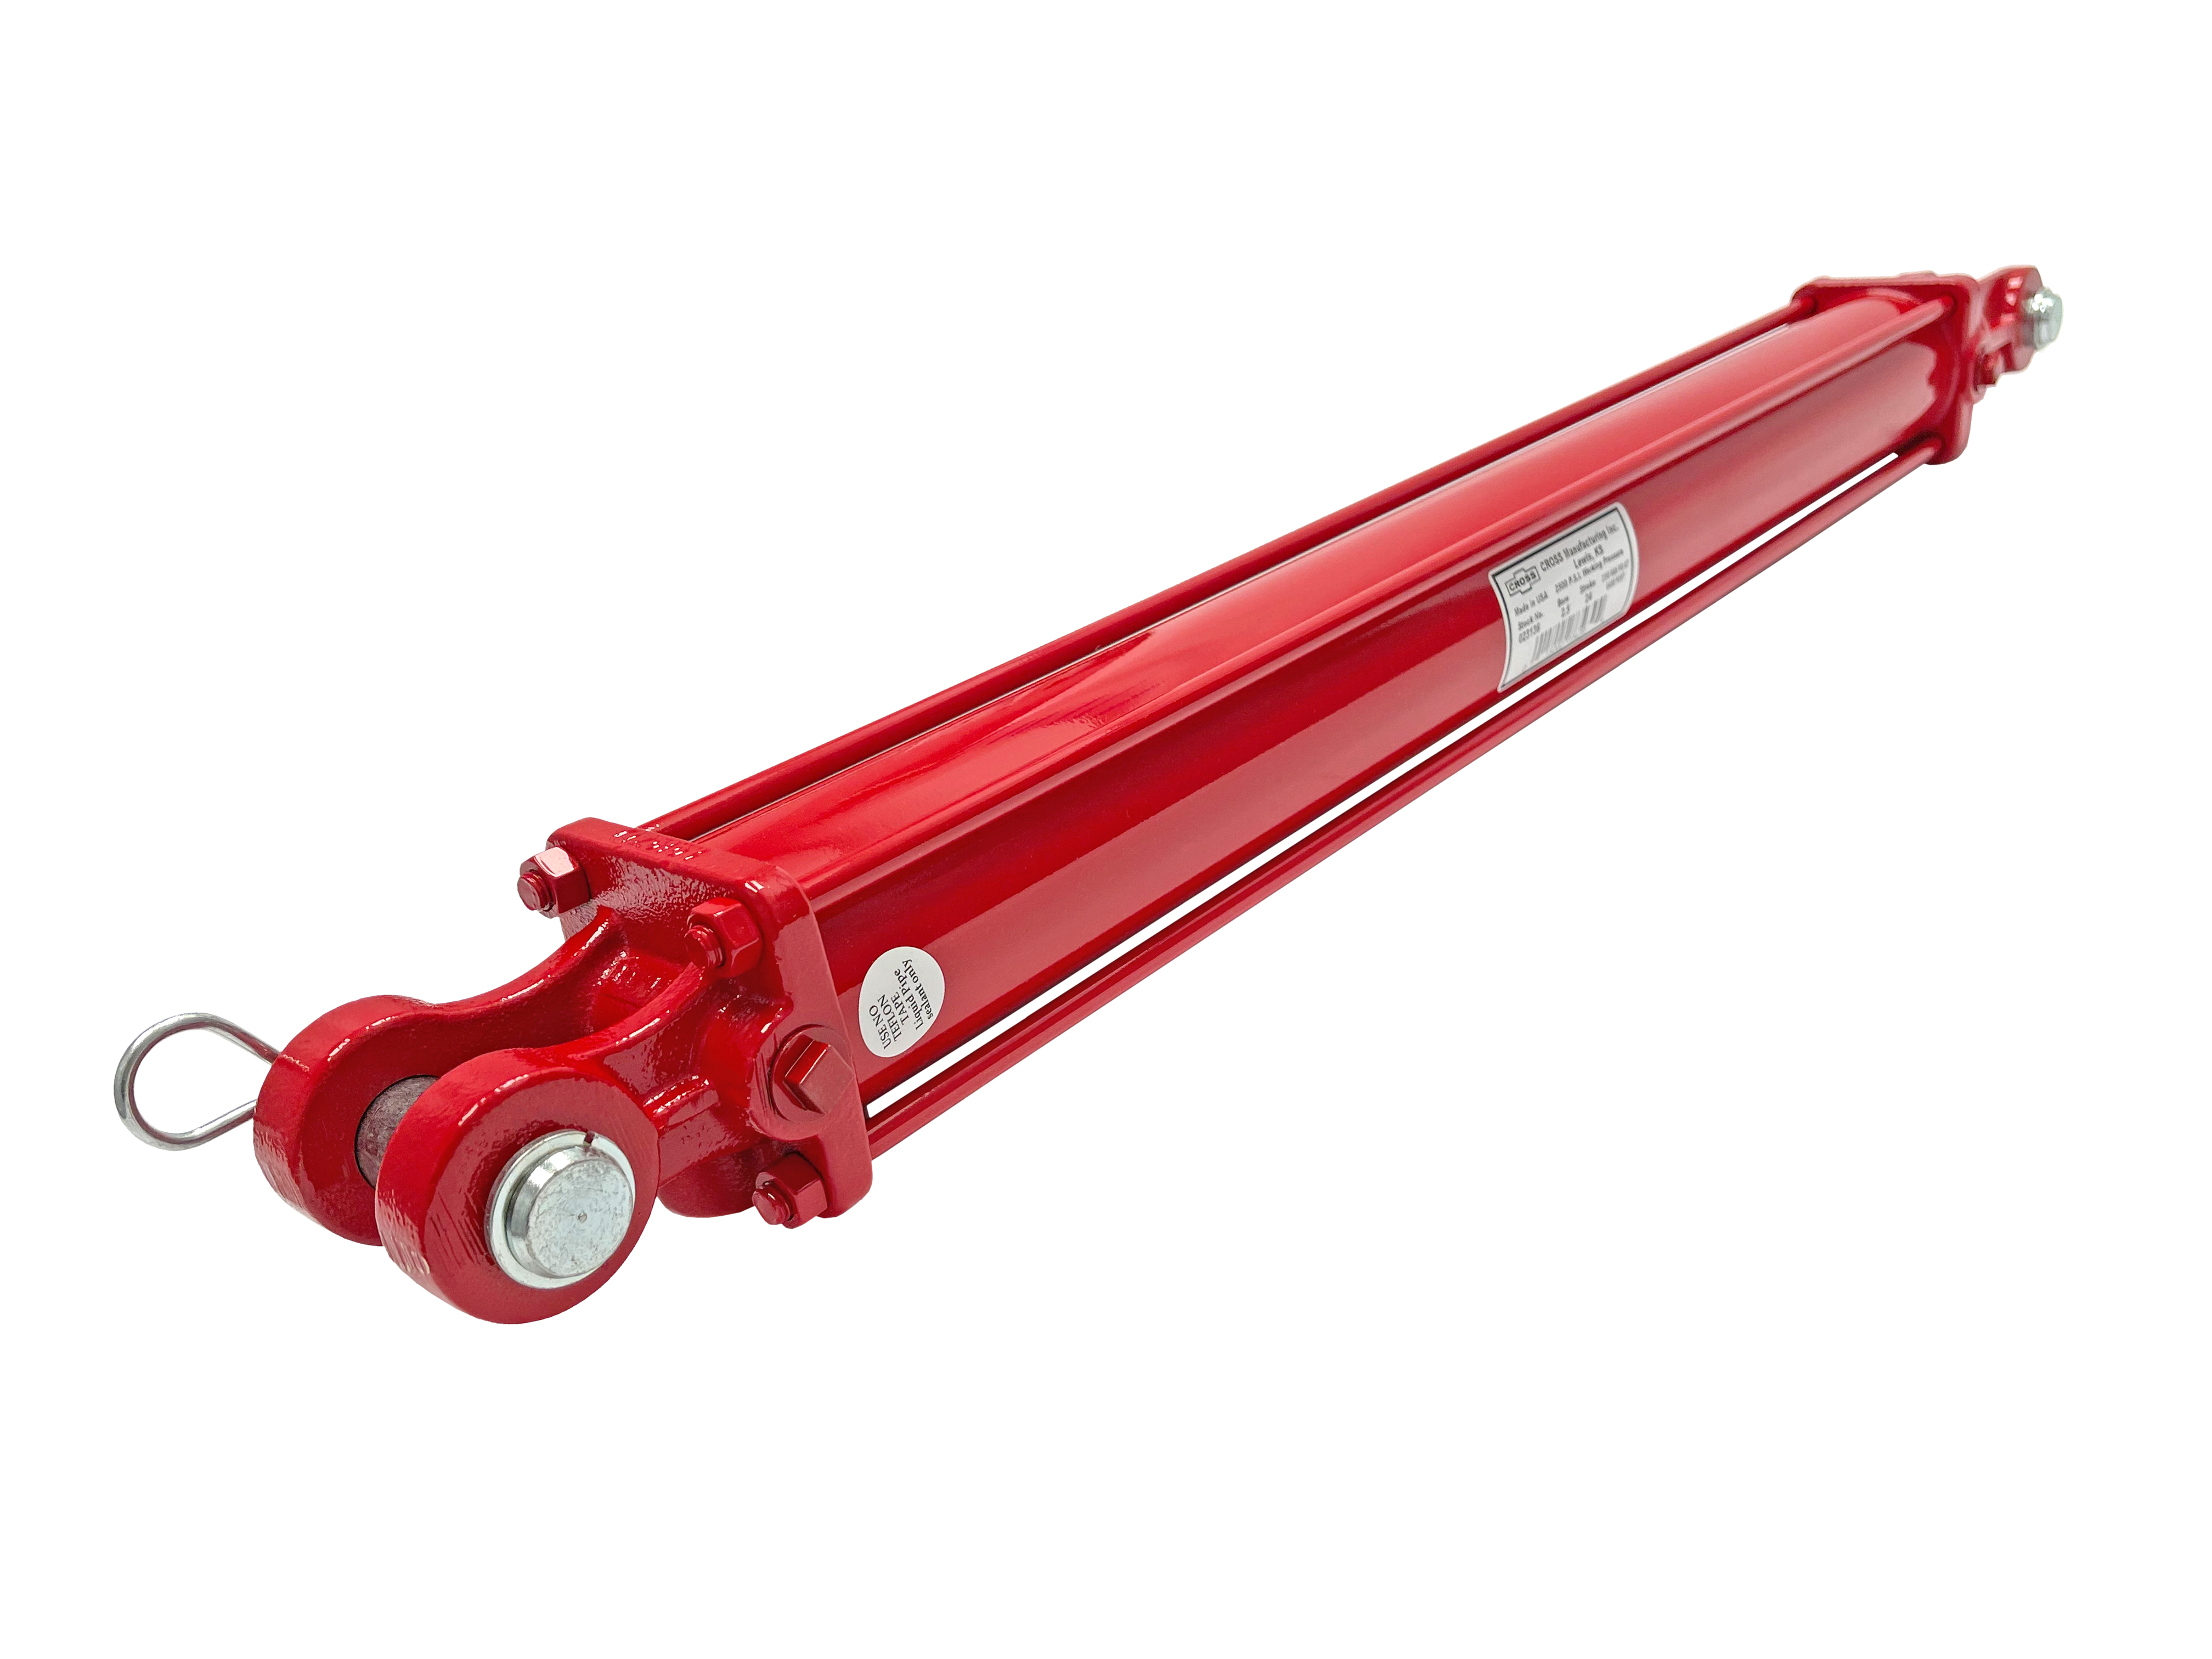 3 bore x 20 stroke CROSS hydraulic cylinder, tie rod double acting cylinder DB series | CROSS MANUFACTURING